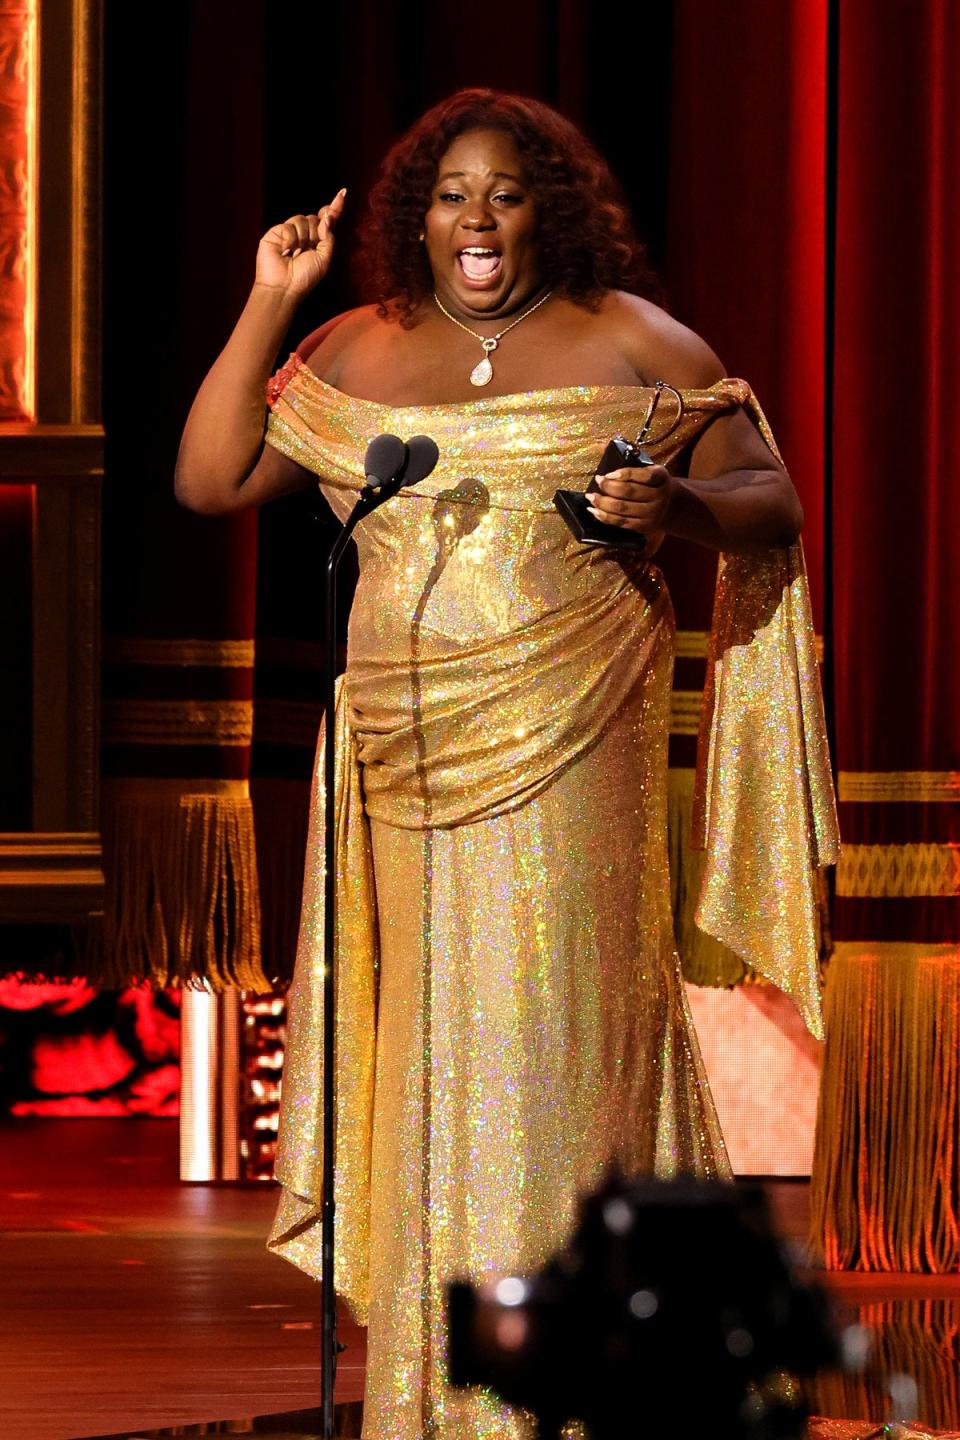 Alex Newell first found fame on Glee. (Getty Images for Tony Awards Pro)